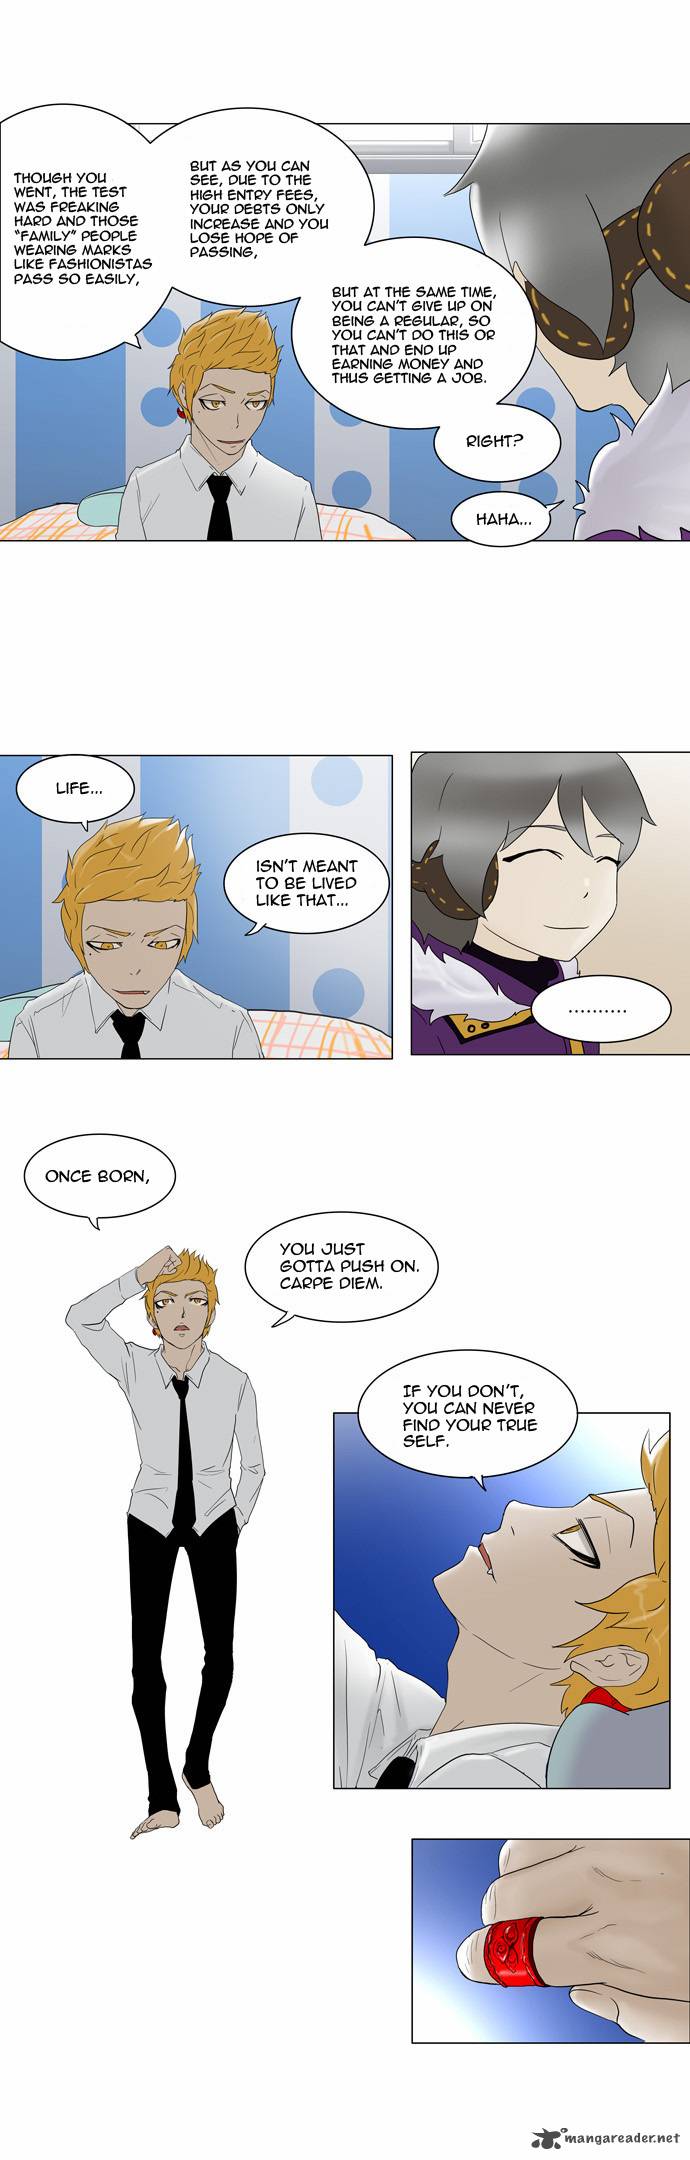 Tower Of God 81 24